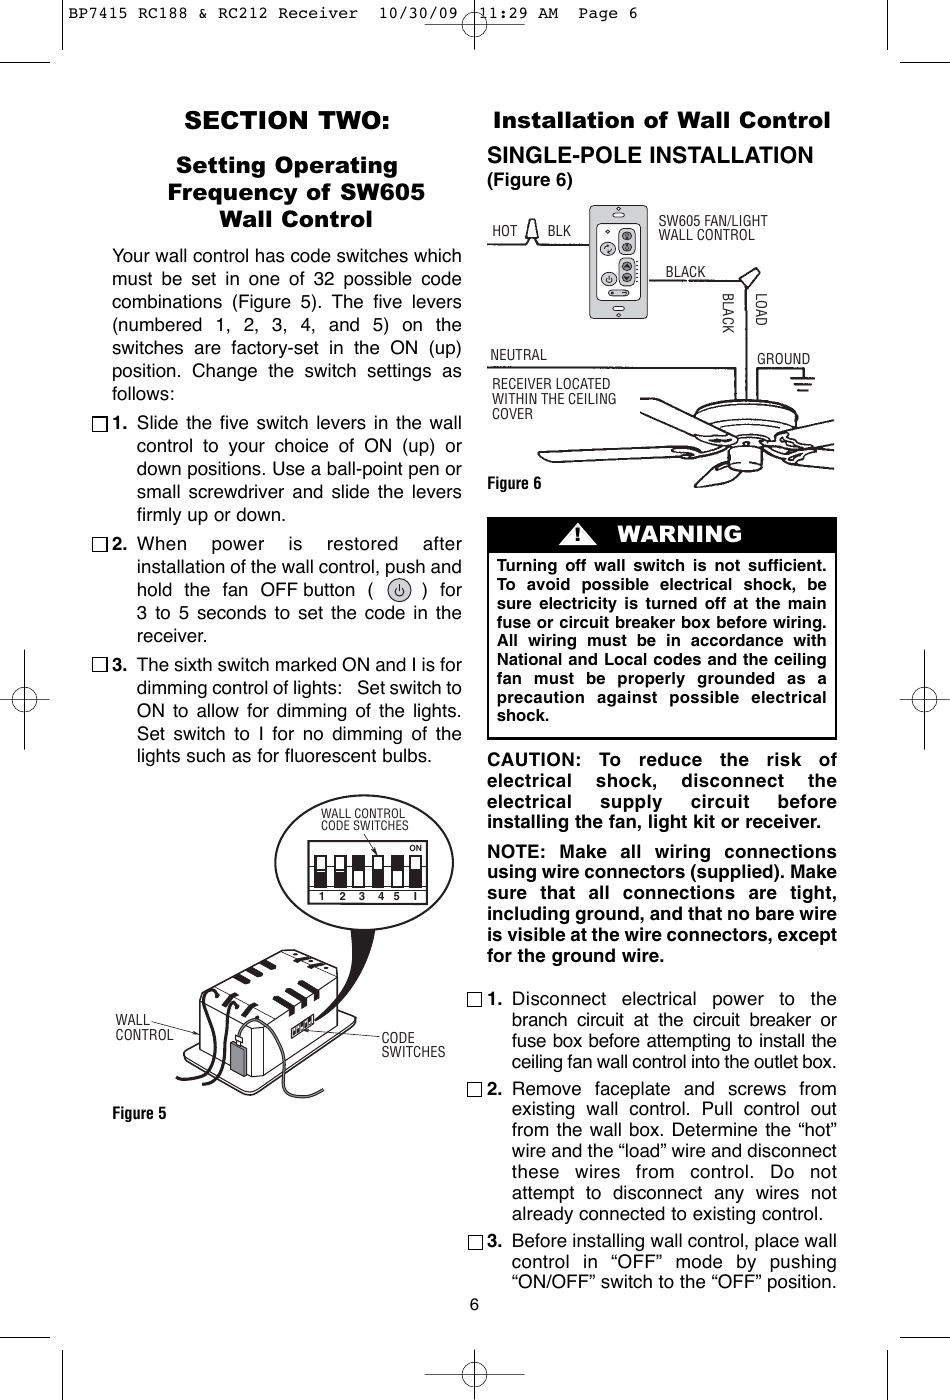 Page 6 of 12 - Emerson Emerson-Rc188-Owners-Manual- BP7415 RC188 & RC212 Receiver  Emerson-rc188-owners-manual